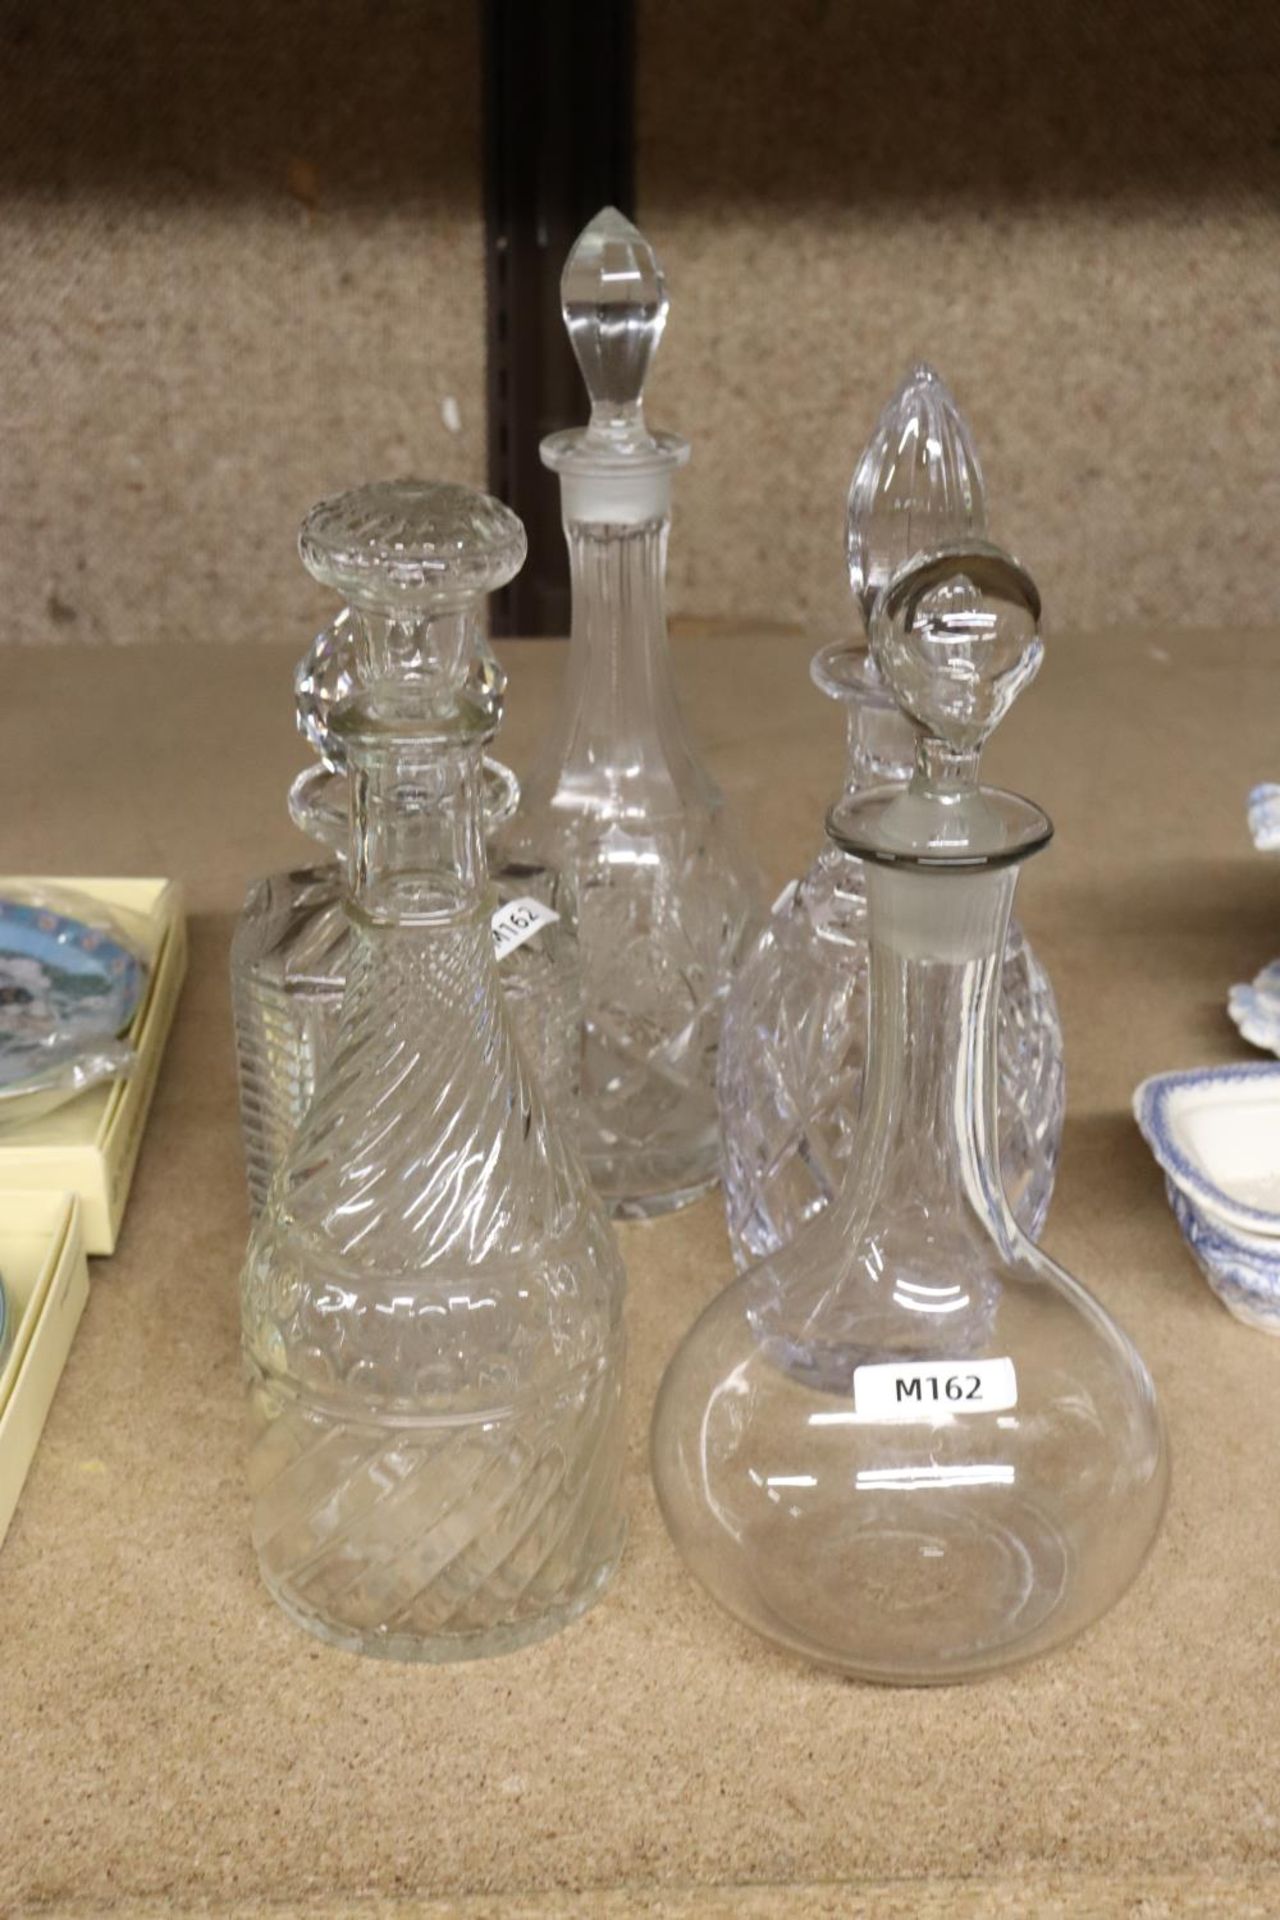 FIVE GLASS DECANTERS